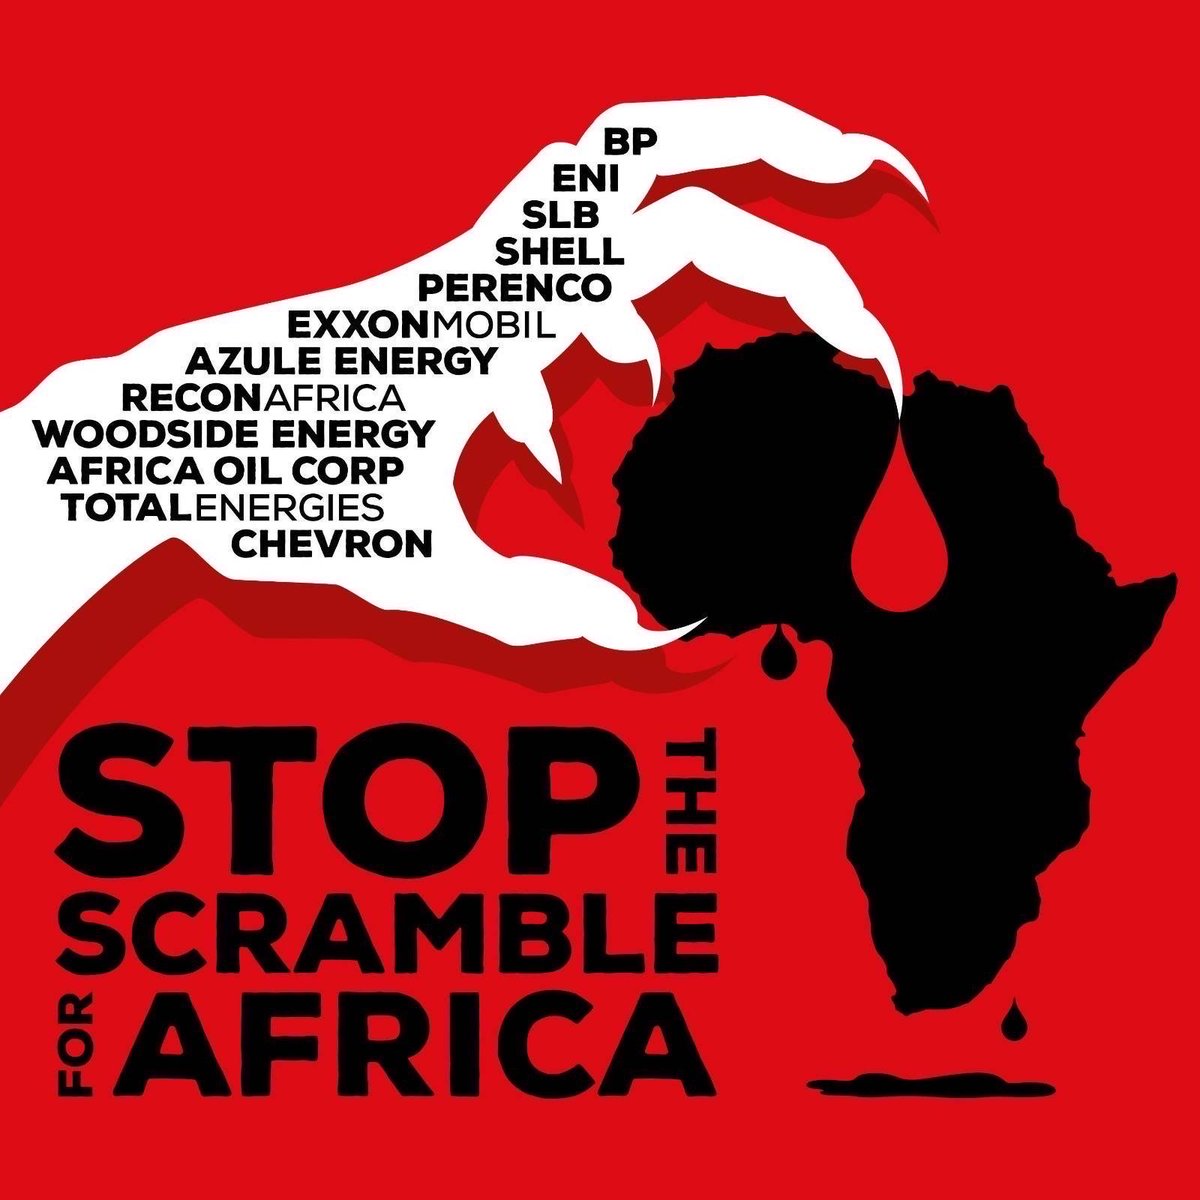 Colonialism is thriving at the Africa Energies Summit, perpetuating the Scramble for African resources

Africa, bearing the brunt of #ClimateCrisis, has vast renewable potential but faces fossil fuel expansion

➡️ Join us May 15th to take action!
#KickPollutersOut #ClimateAction